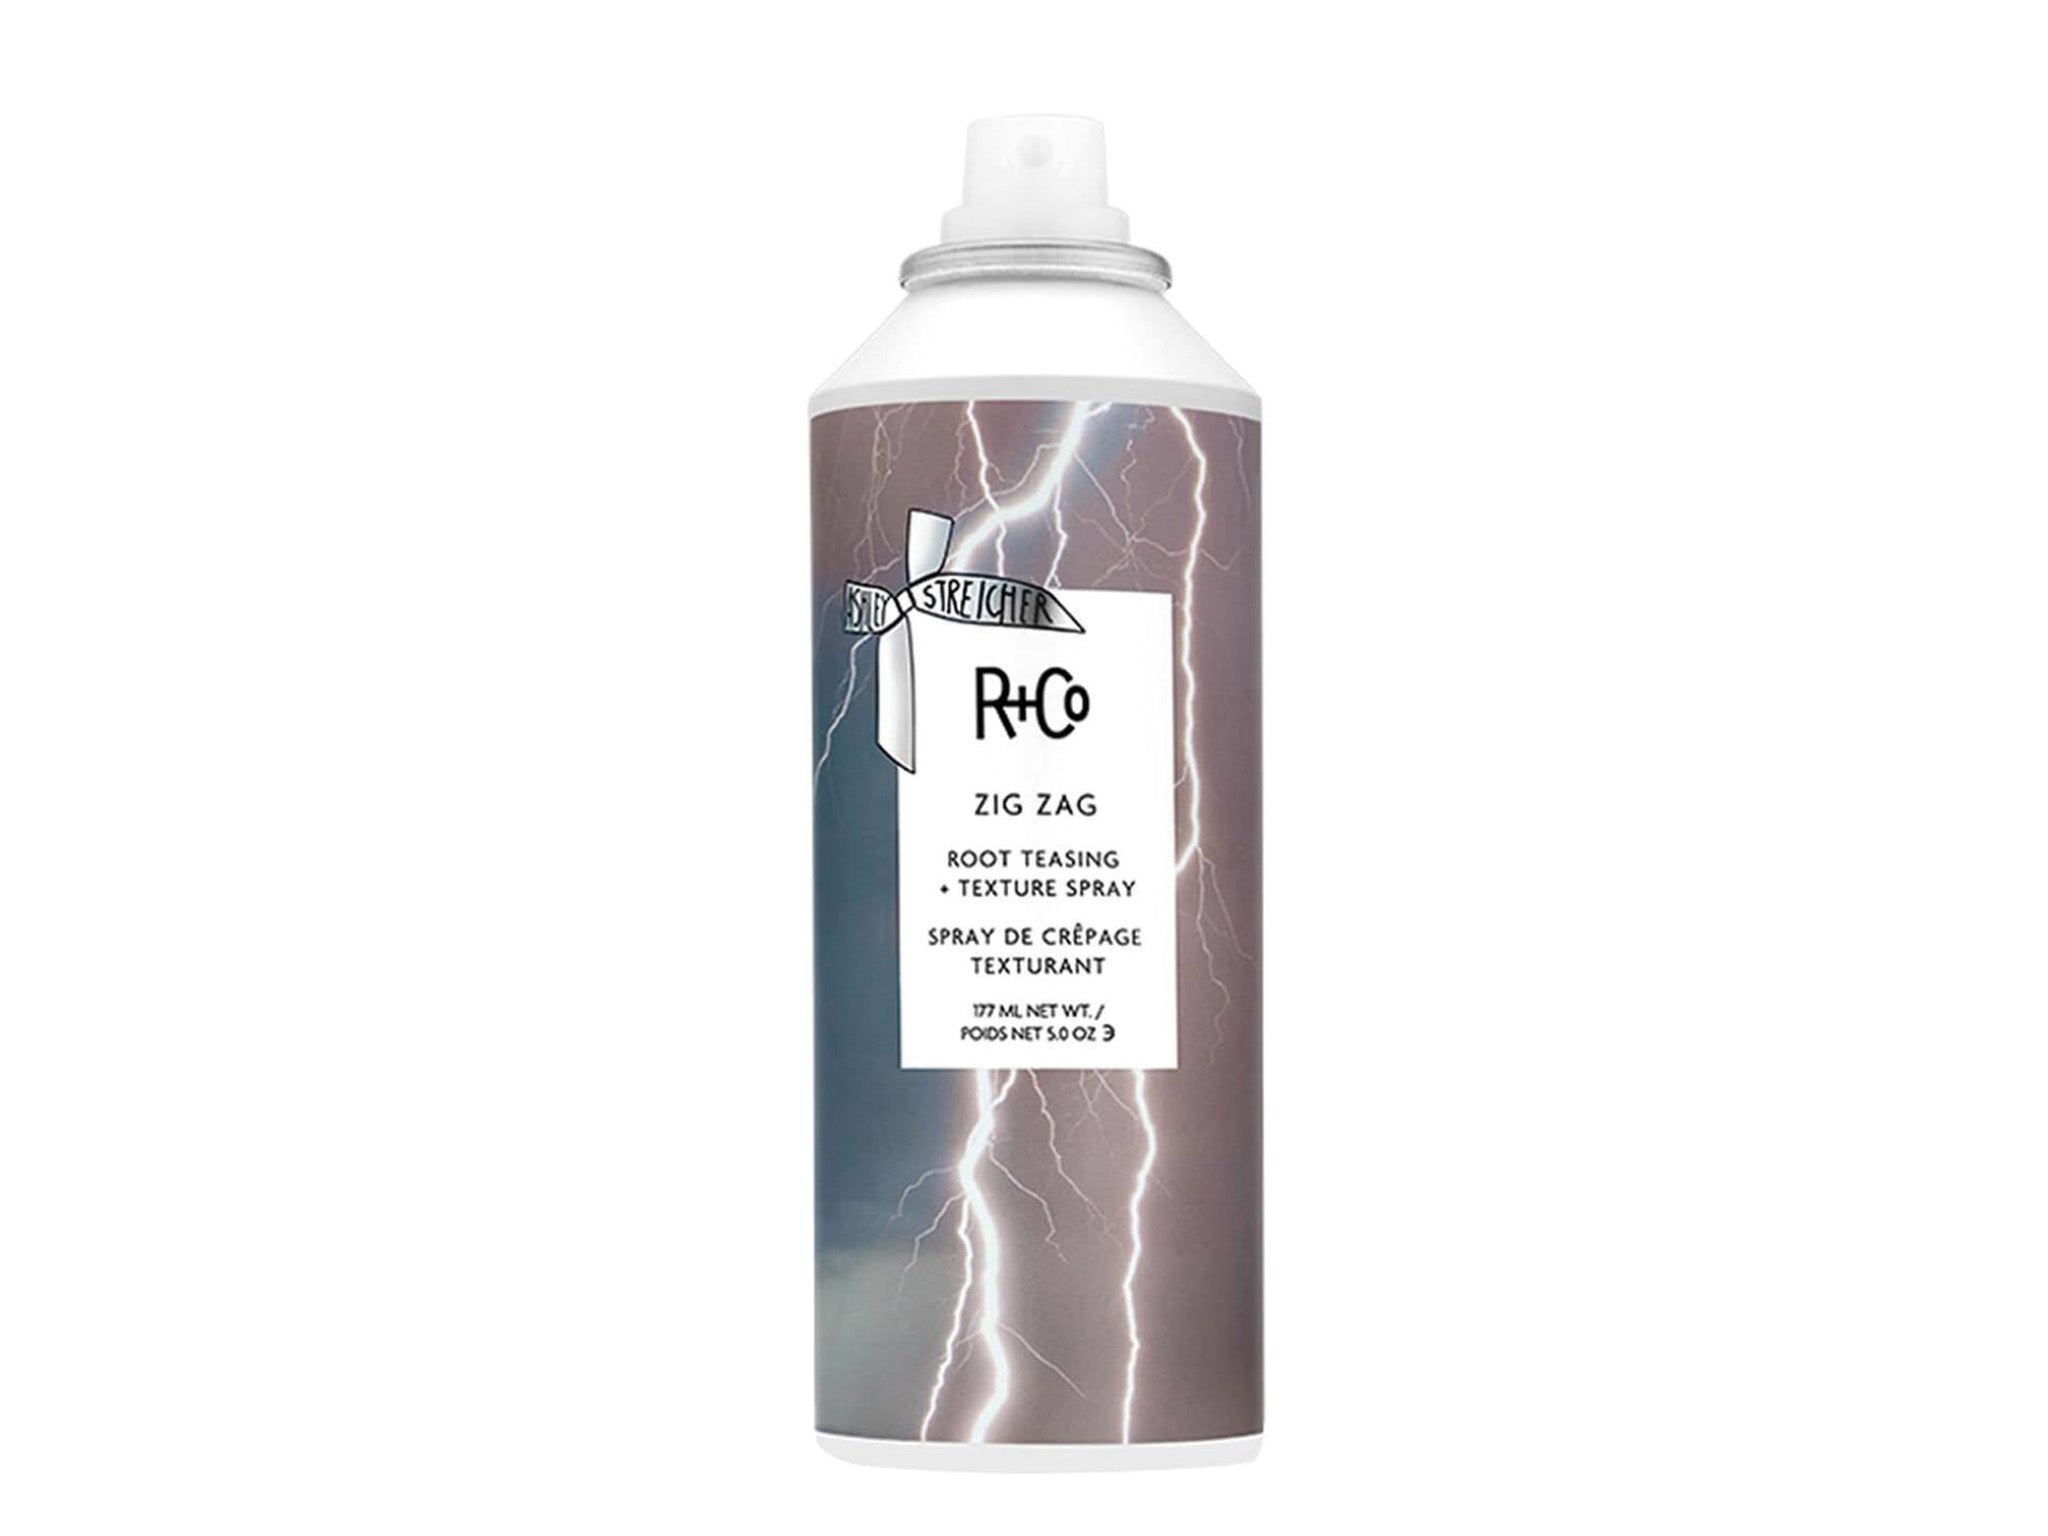 R+Co zig zag root teasing and texture spray